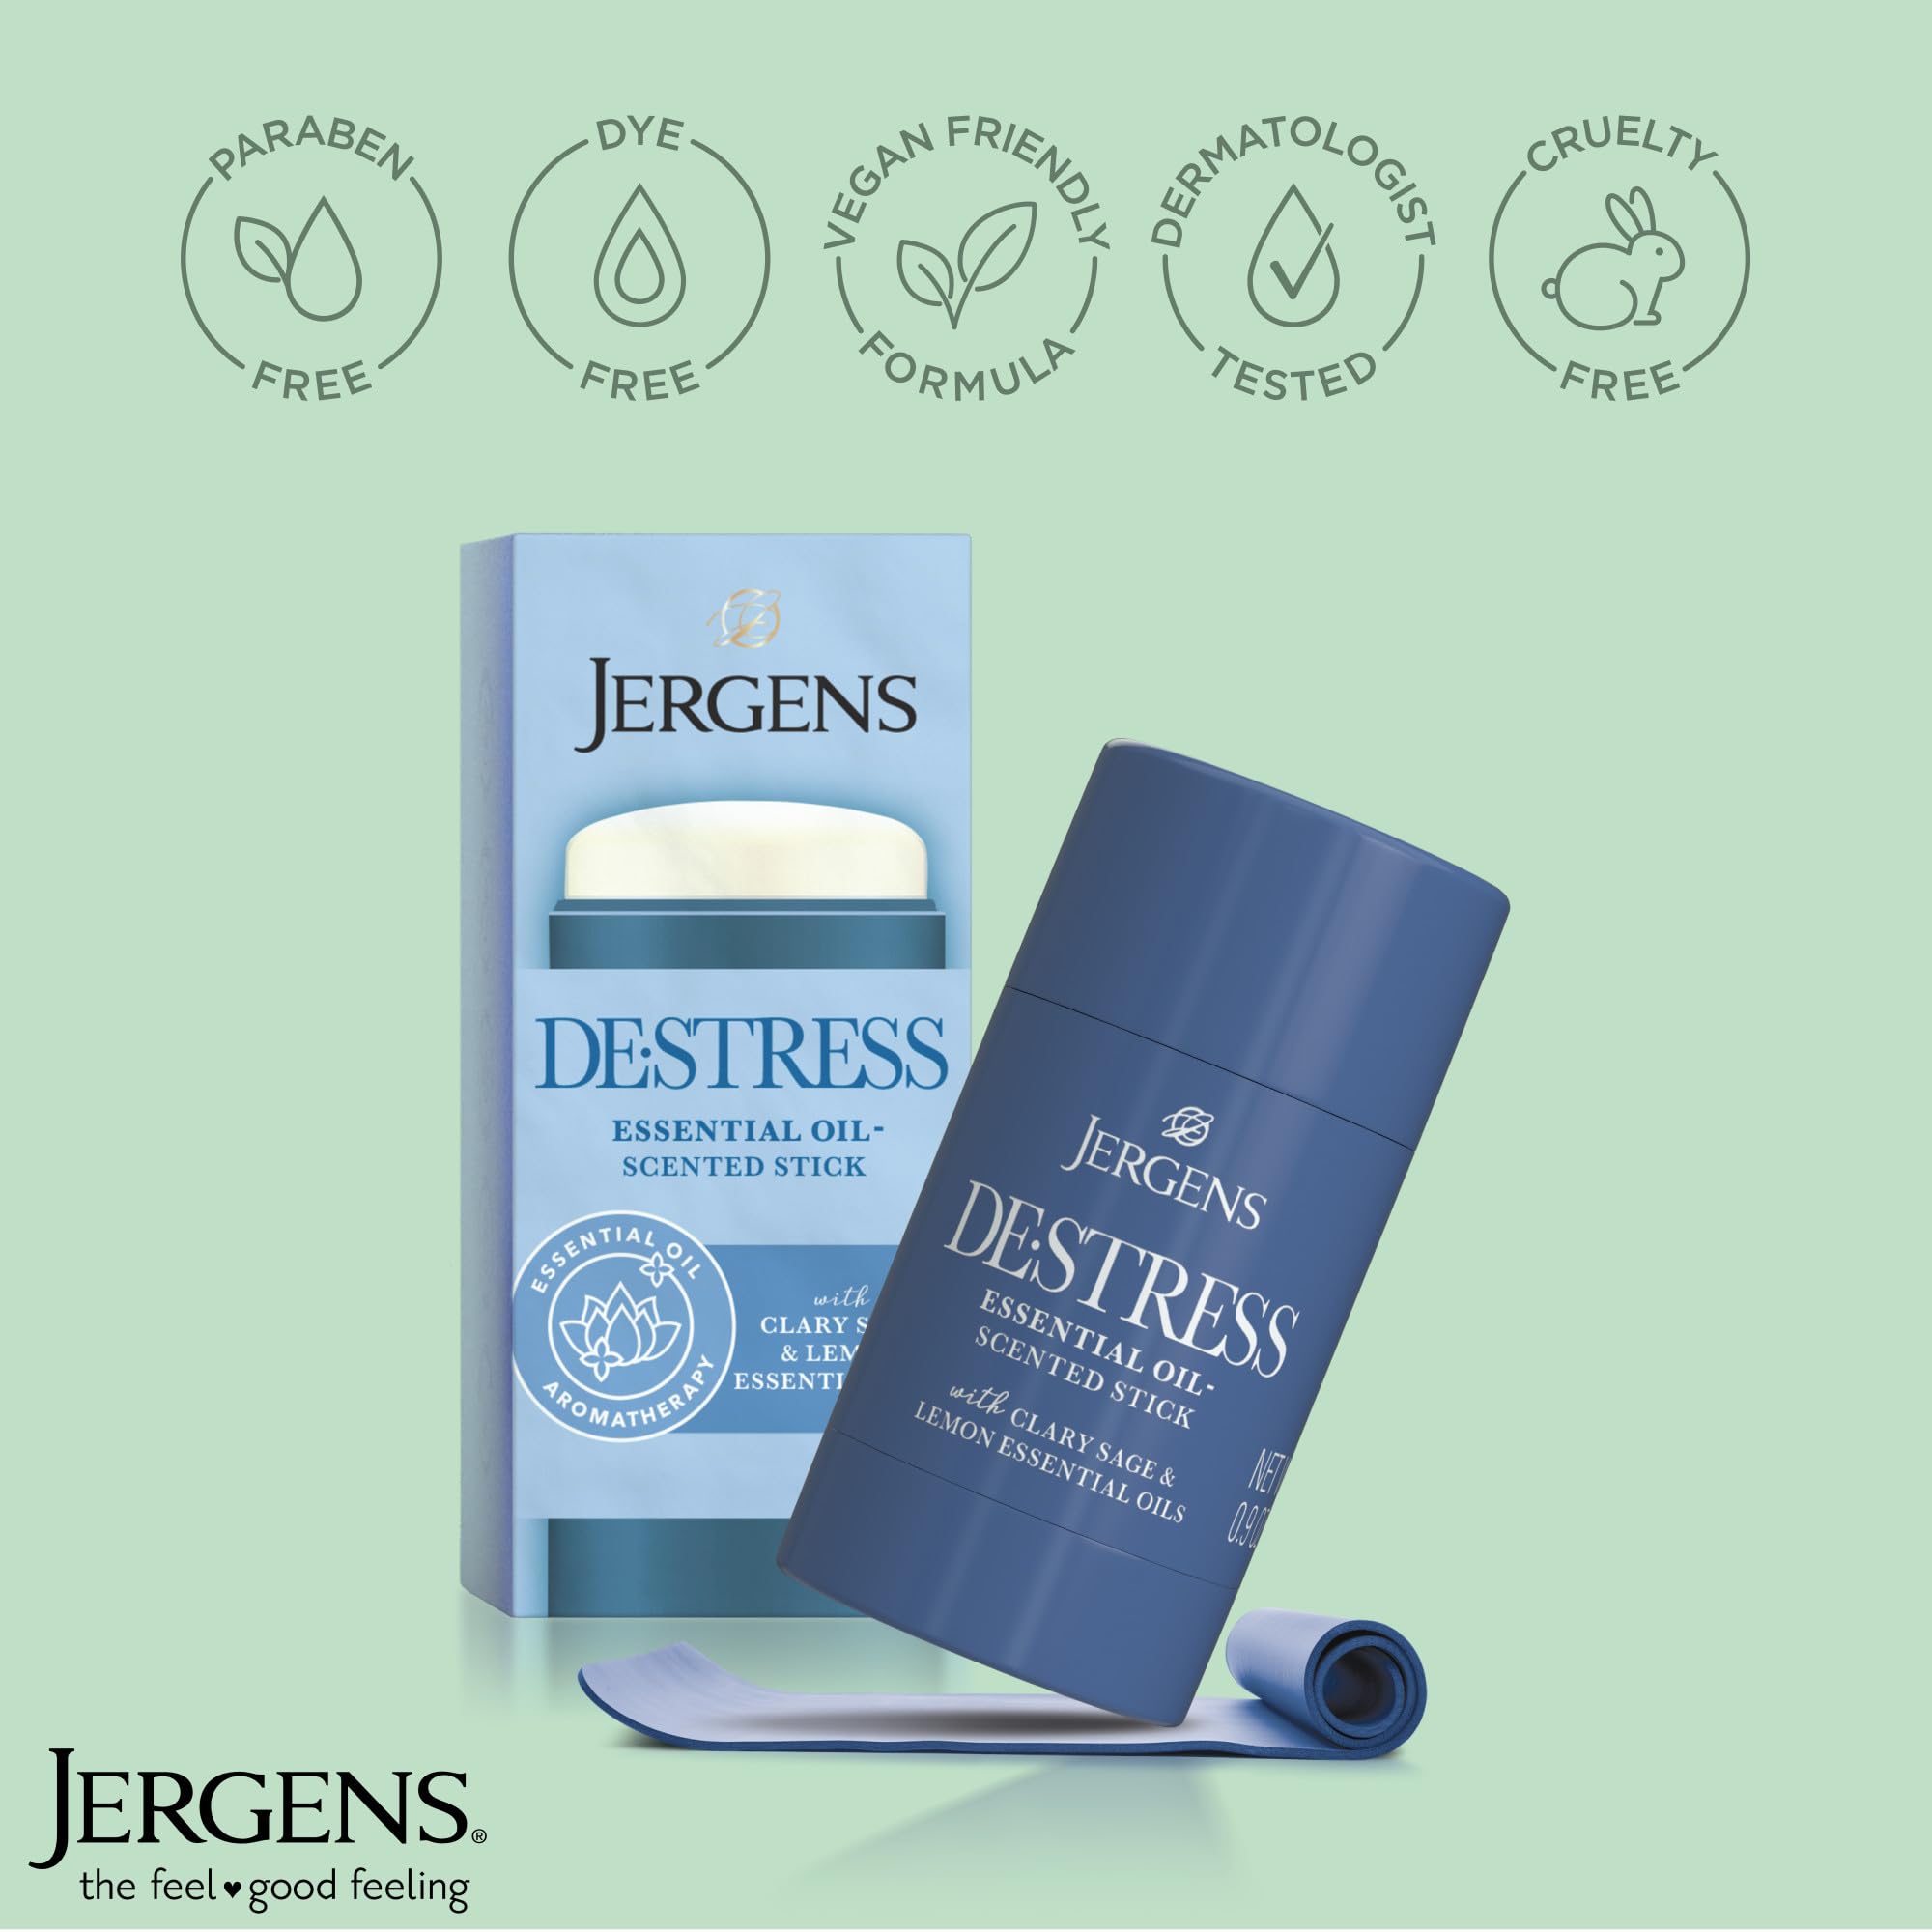 Jergens De-Stress Essential Oil-Scented Stick, Aromatherapy Stick with Lemon and Clary Sage Essential Oils, 0.9 Oz